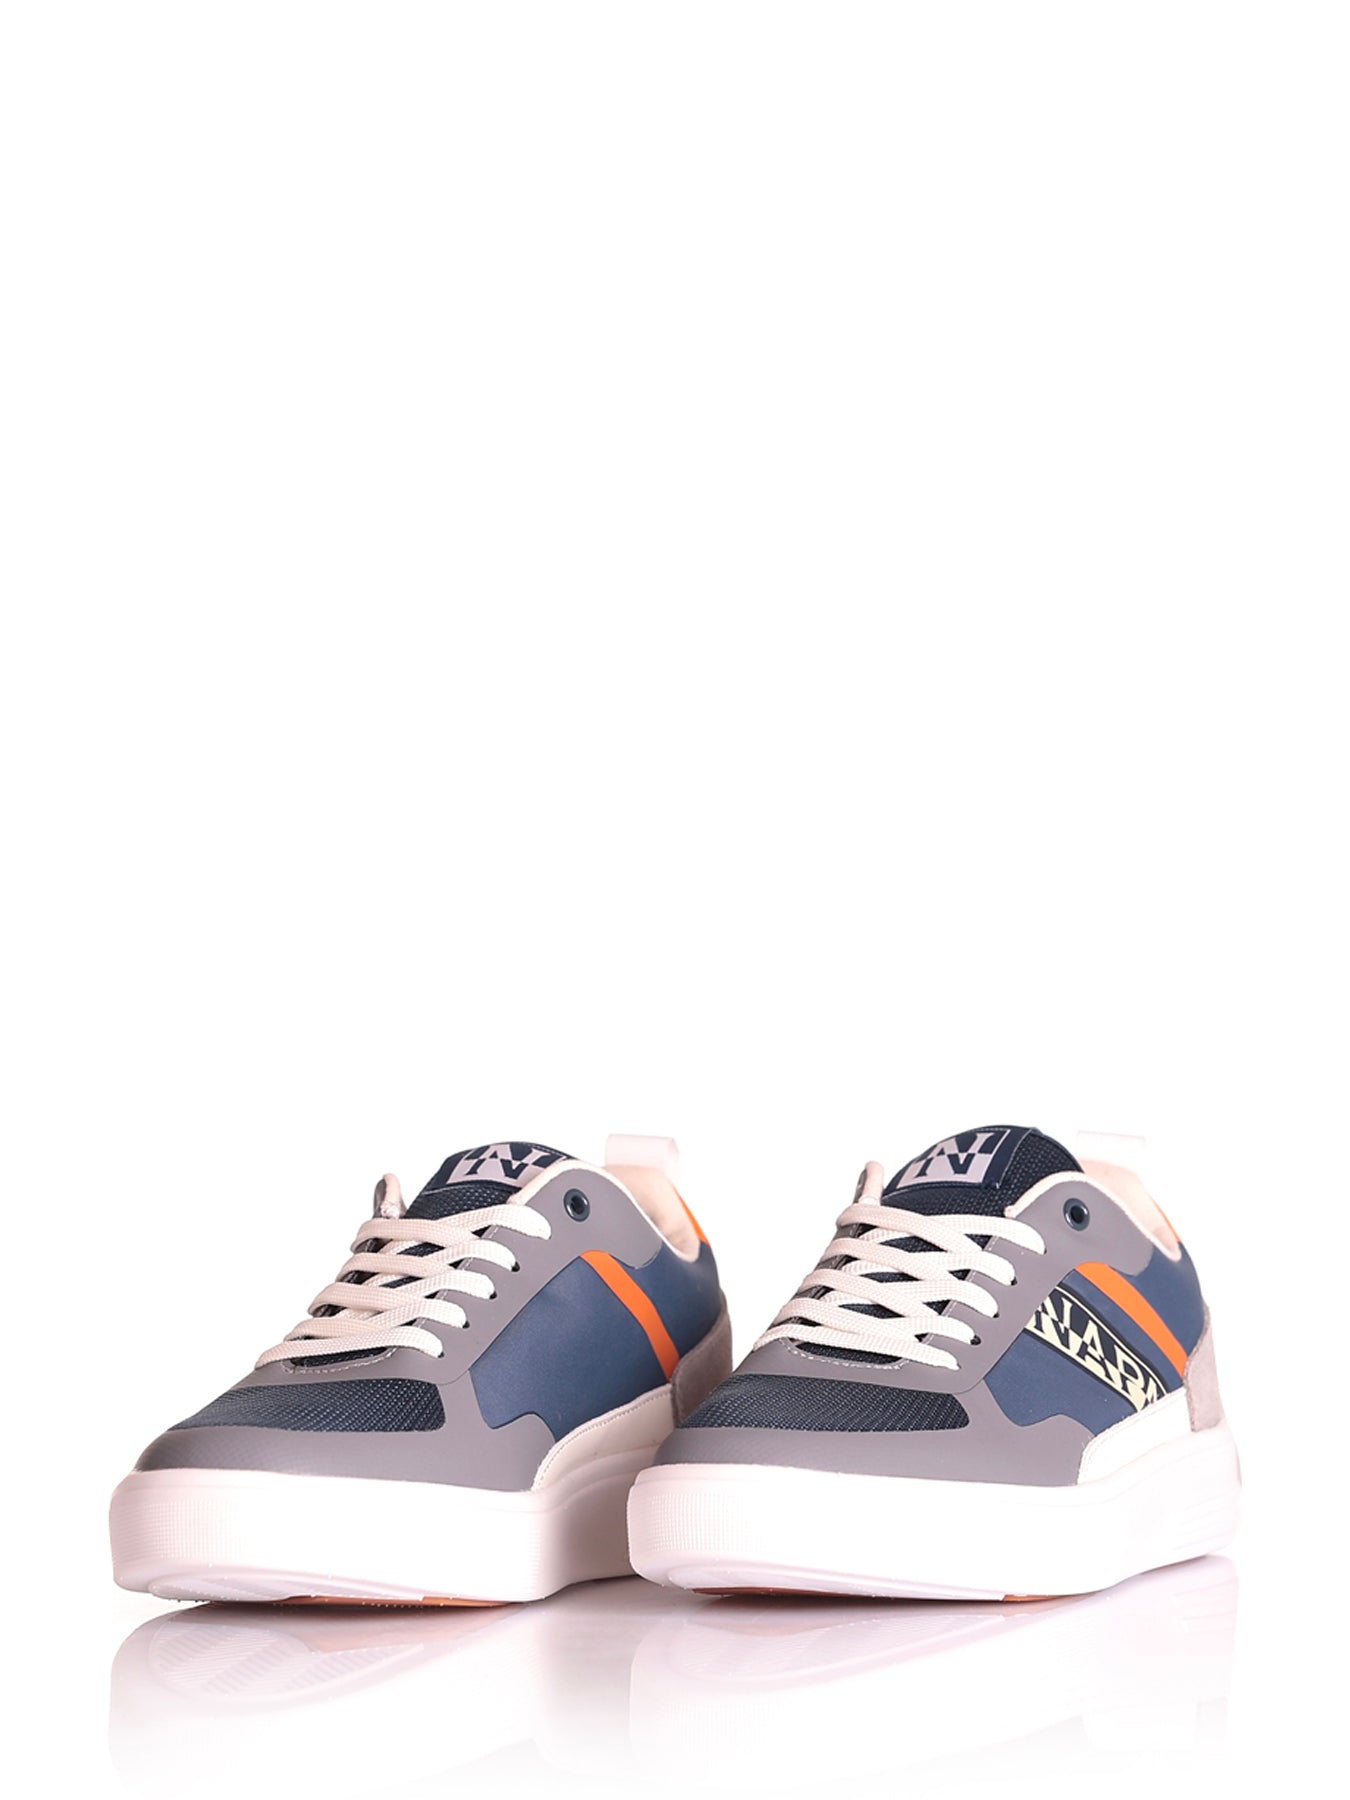 Sneakers Np0a4hkr Navy/grey